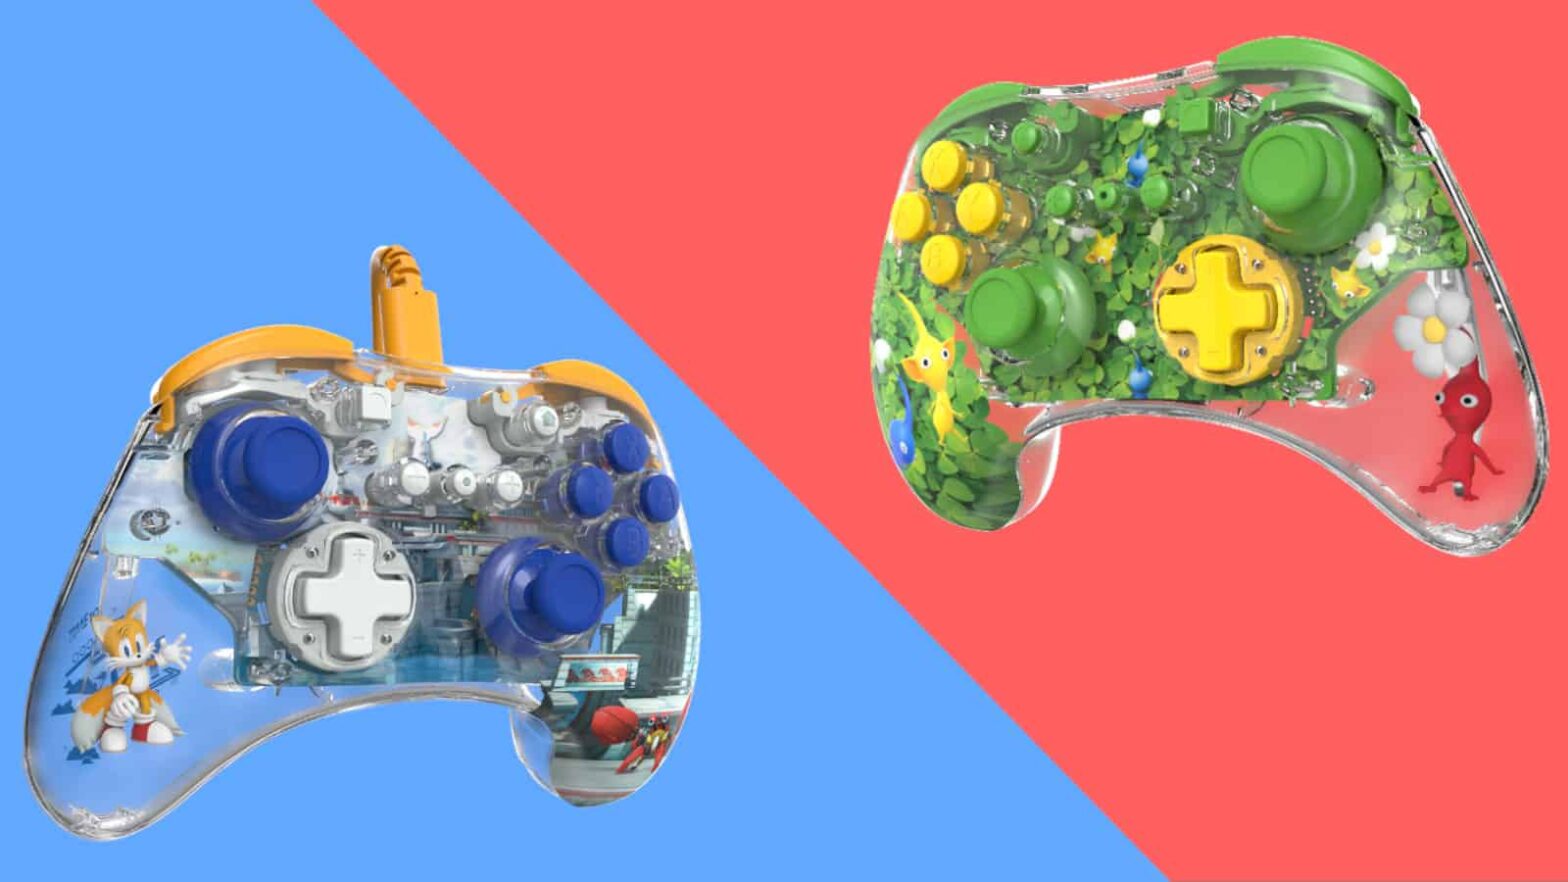 Check out these super stylish Switch and Xbox accessories